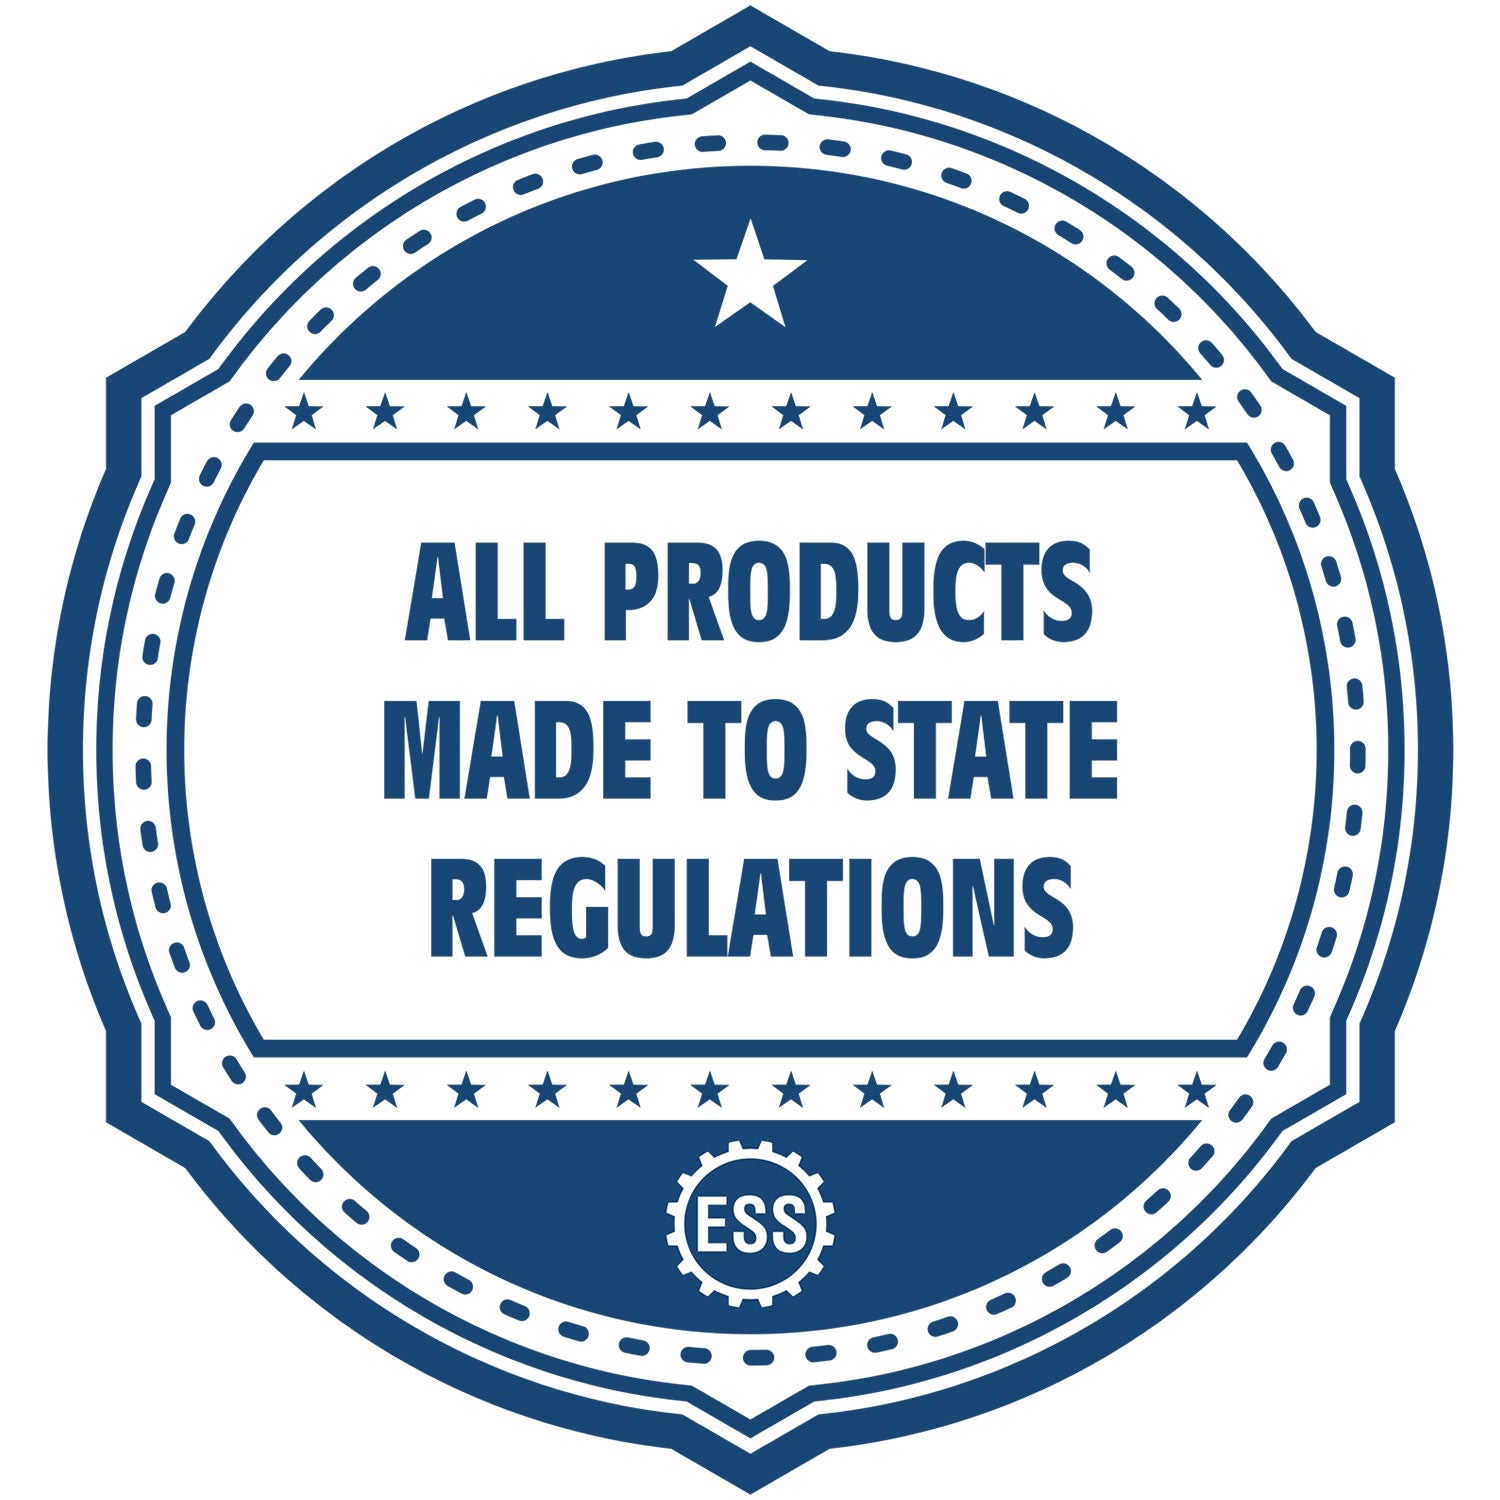 An icon or badge element for the Self-Inking Indiana Landscape Architect Stamp showing that this product is made in compliance with state regulations.